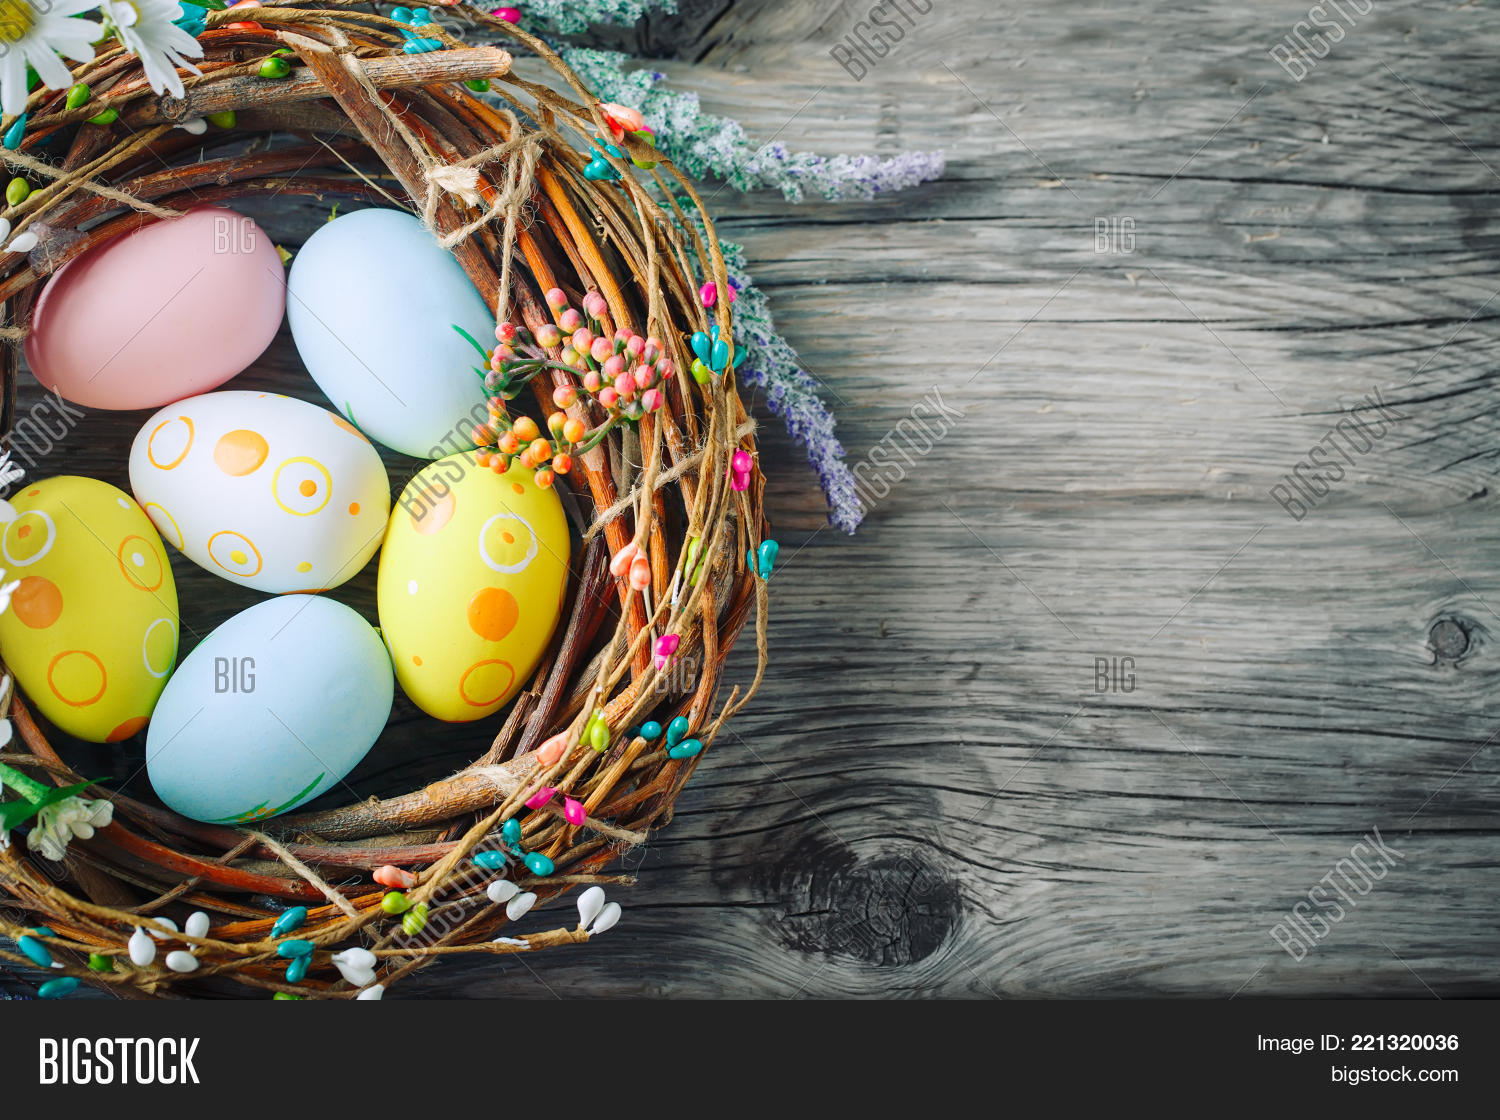 Happy Easter Image Photo Free Trial Bigstock